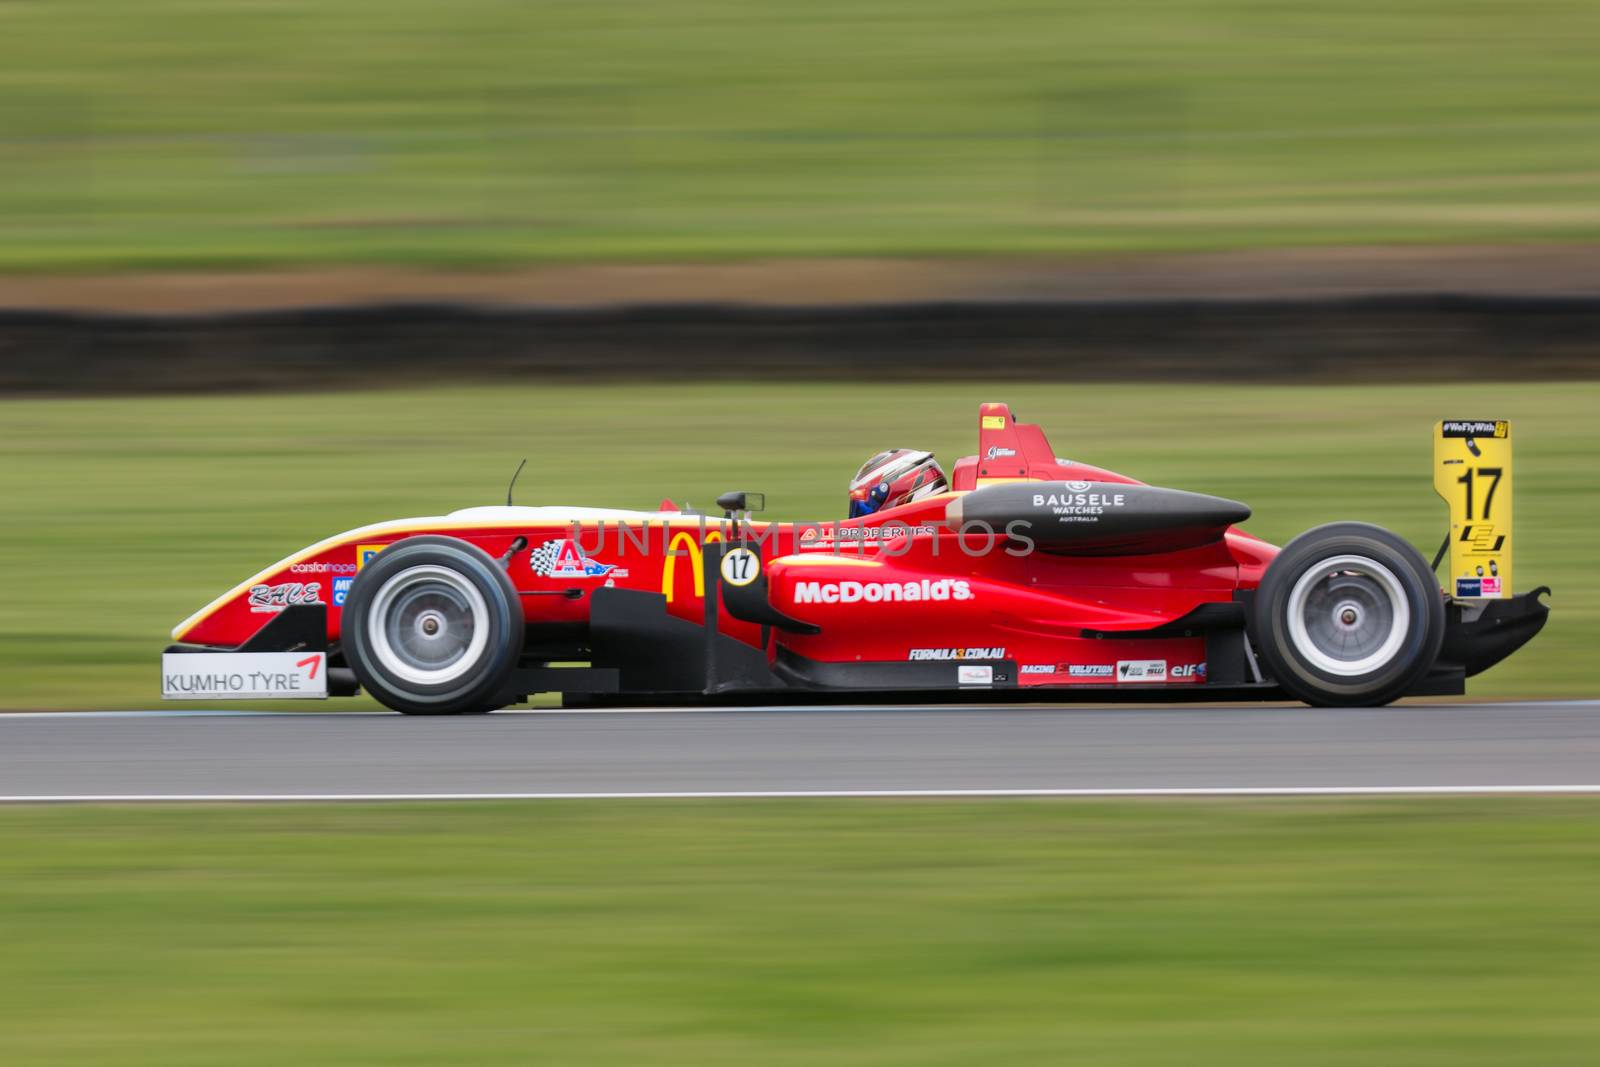 MELBOURNE/AUSTRALIA - SEPTEMBER 10, 2016: Christopher Anthony behind the wheel of the McDonalds Gilmour Racing Formula 3 car for qualifying at Round 6 of the Shannon's Nationals at Phillip Island GP Track in Victoria, Australia 9-11 September.